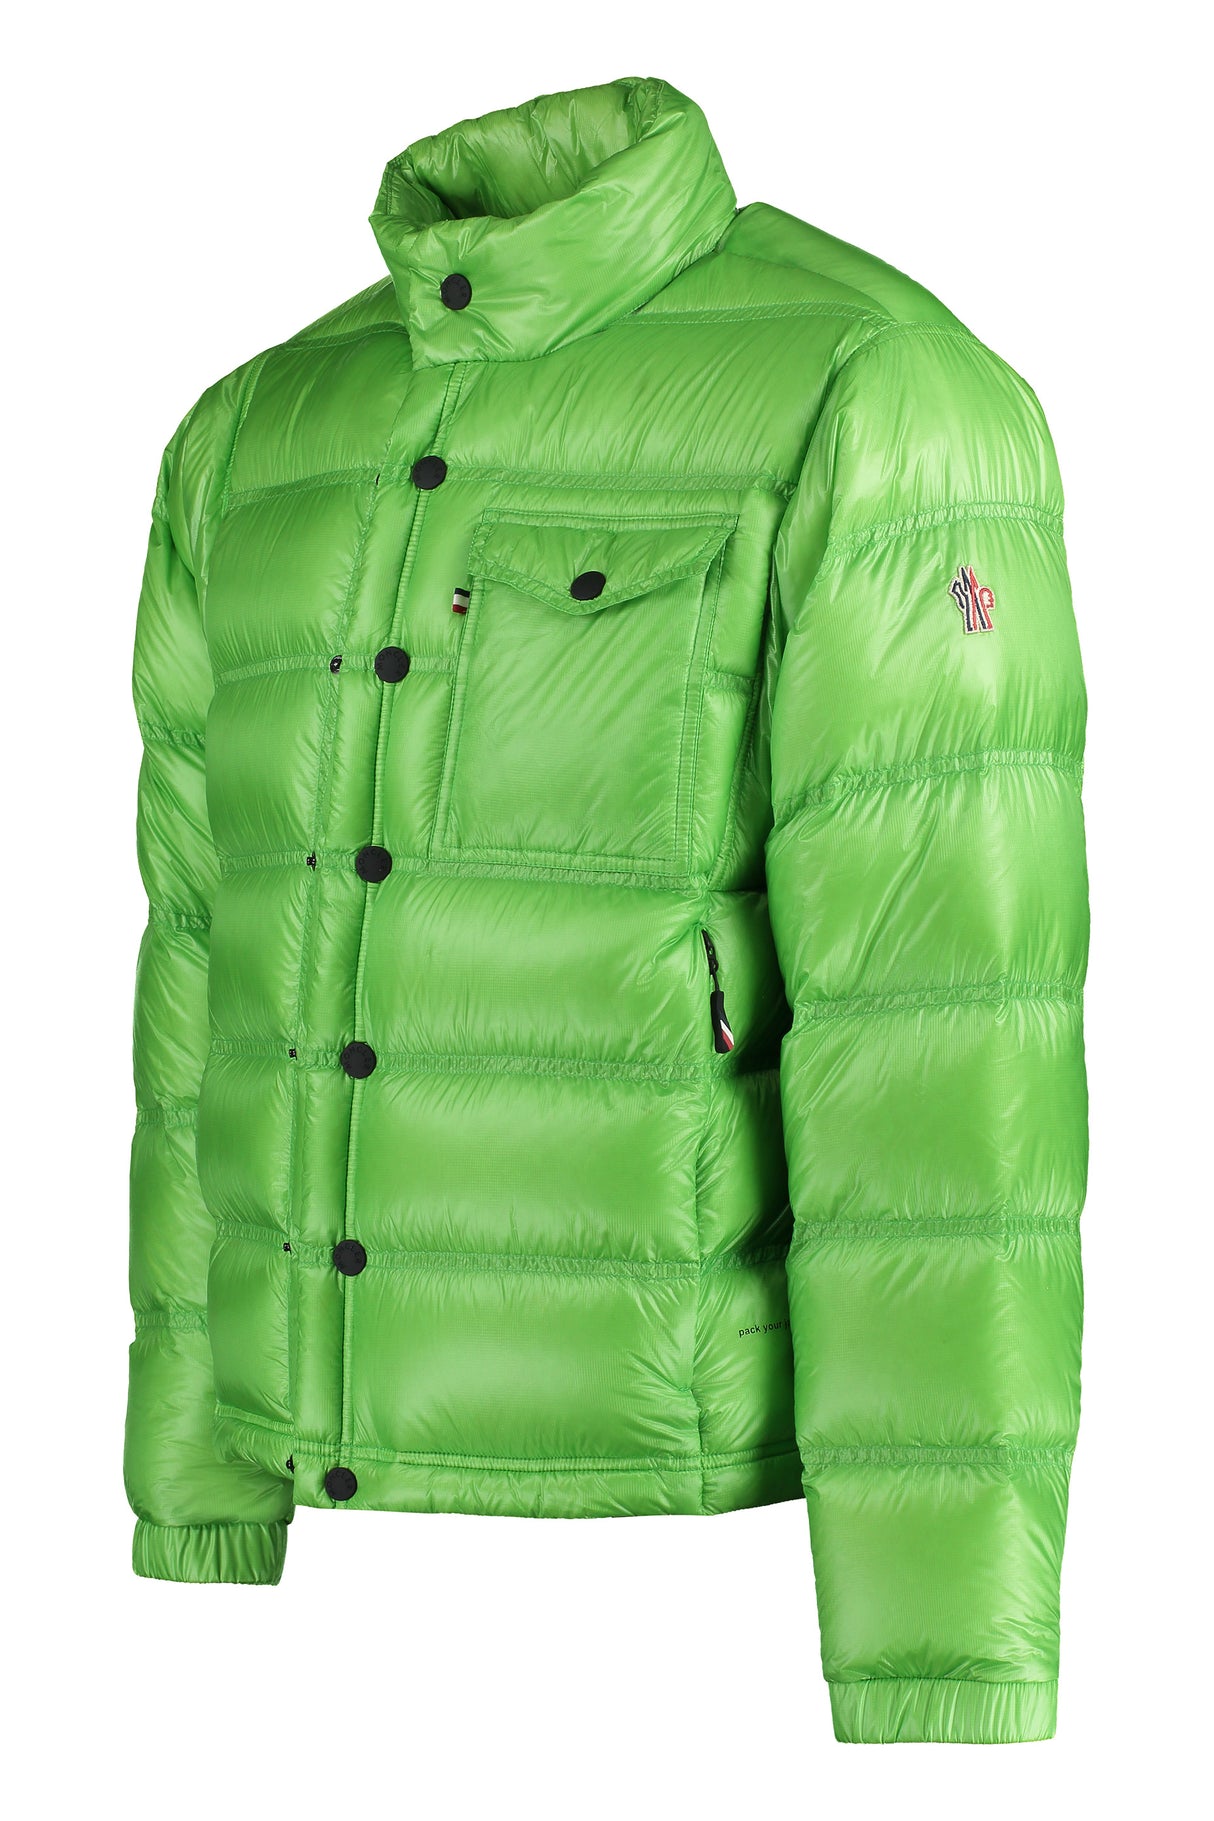 MONCLER GRENOBLE Men's Green Down Jacket with Removable Gloves and Adjustable Hem - FW23 Collection